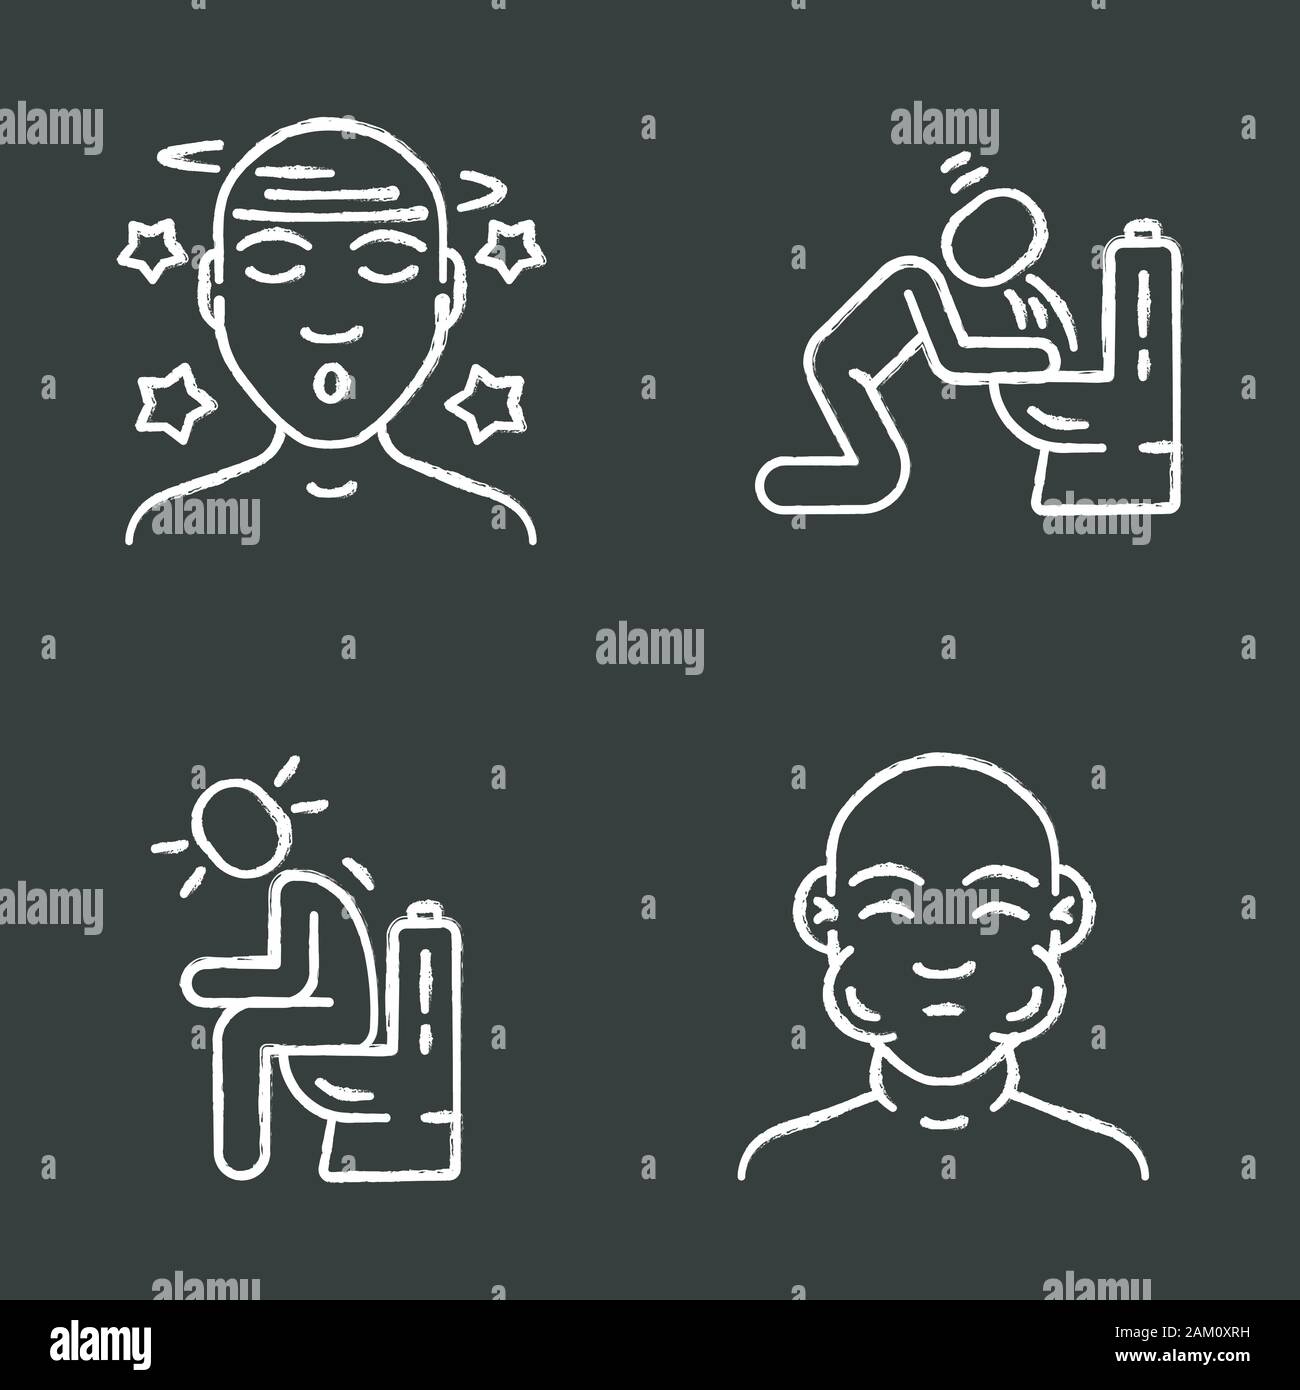 Food poisoning, allergy symptoms chalk icons set. Vomiting, diarrhea, constipation. Swelling, dizziness allergic reaction. Mumps, flu fever. Isolated Stock Vector